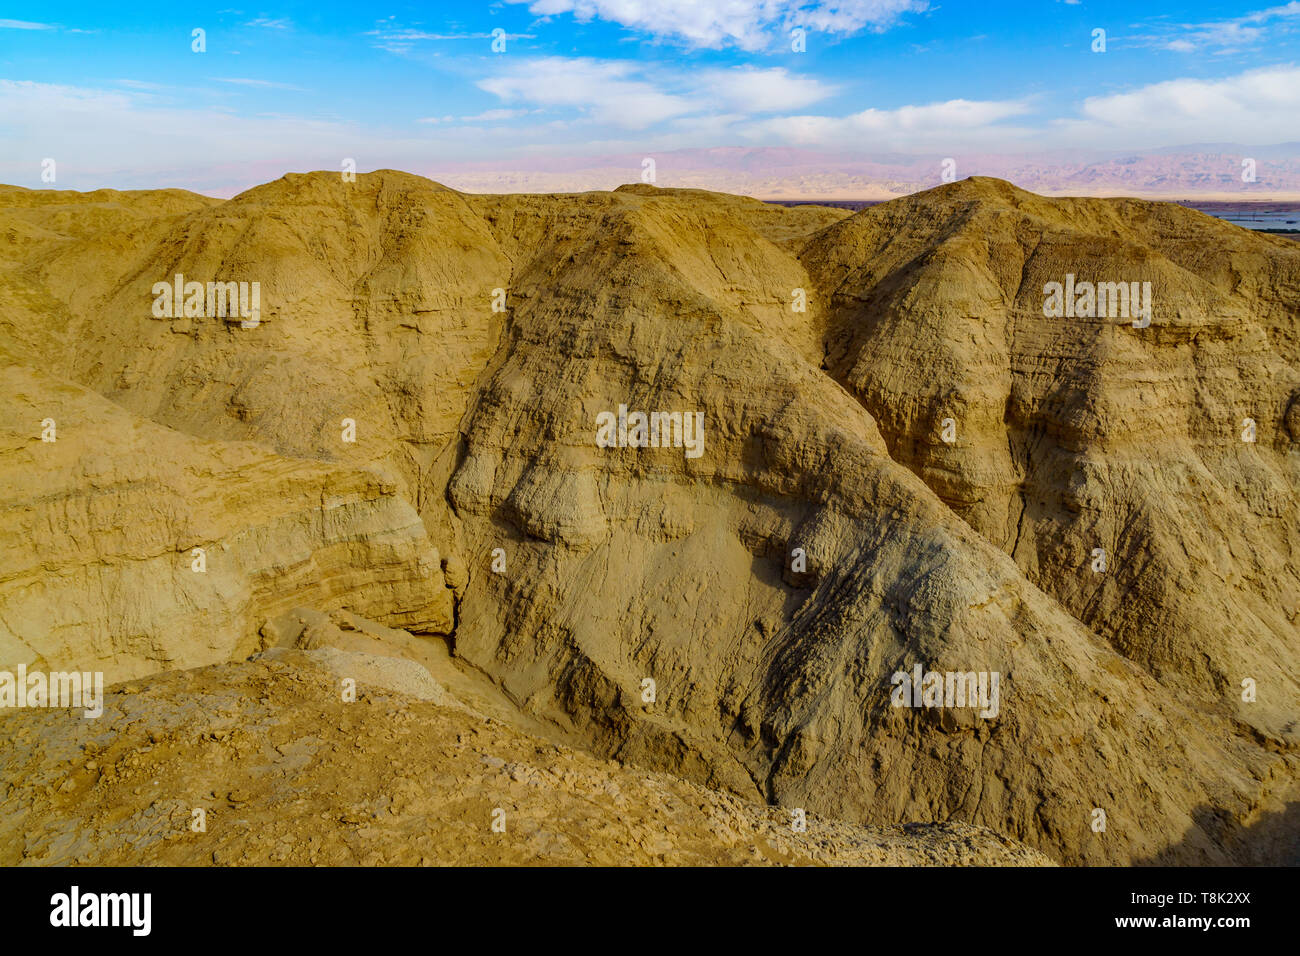 Landscape of lissan marl rocks and the Edom mountains, along the Arava Peace Road, Southern Israel Stock Photo